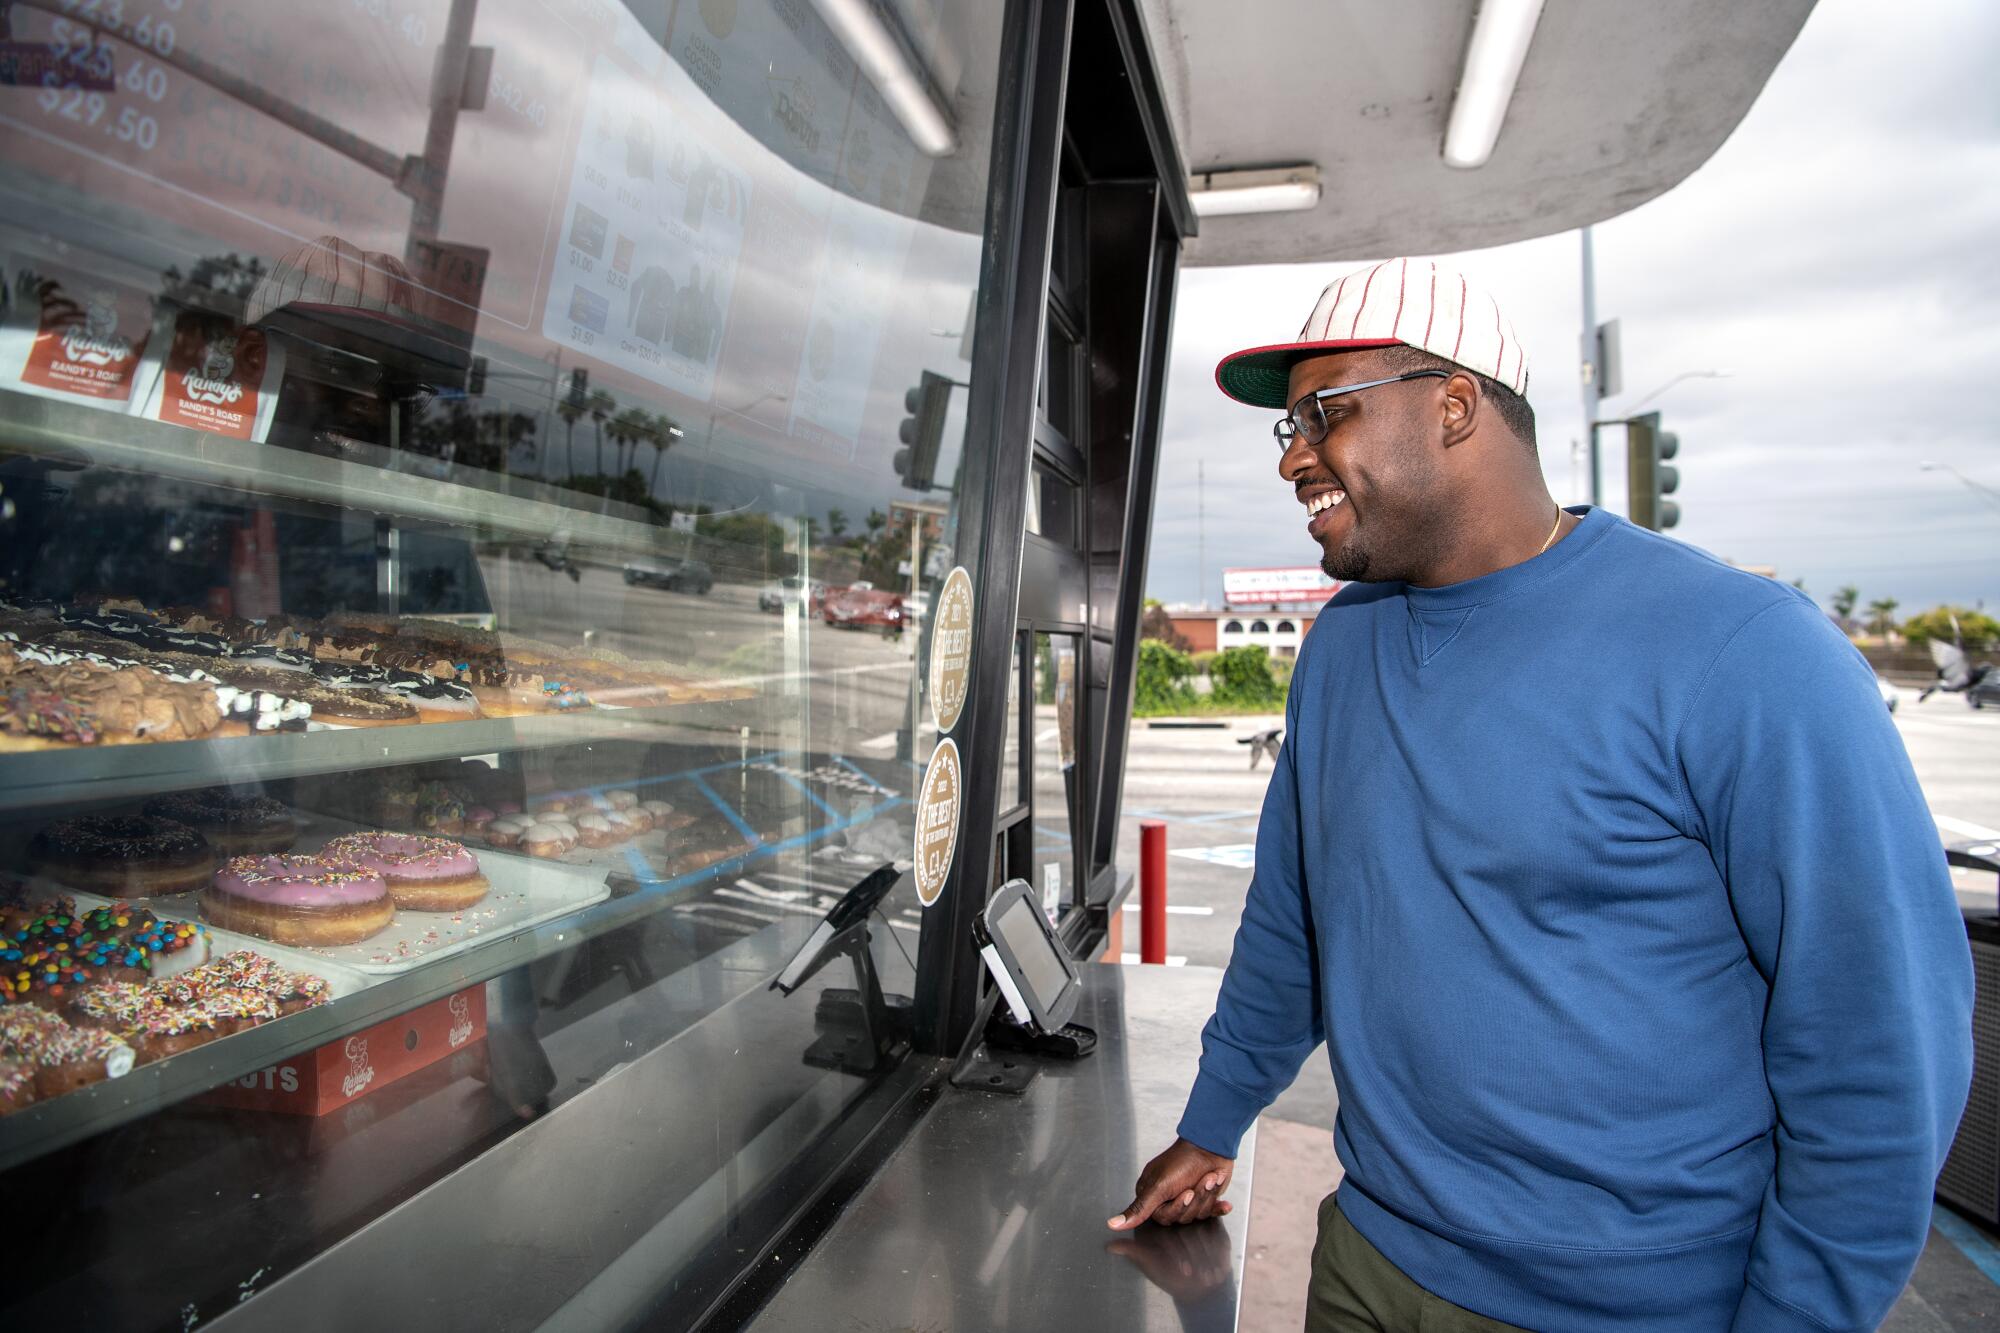 Lionel Boyce orders doughnuts at Randy's Donuts